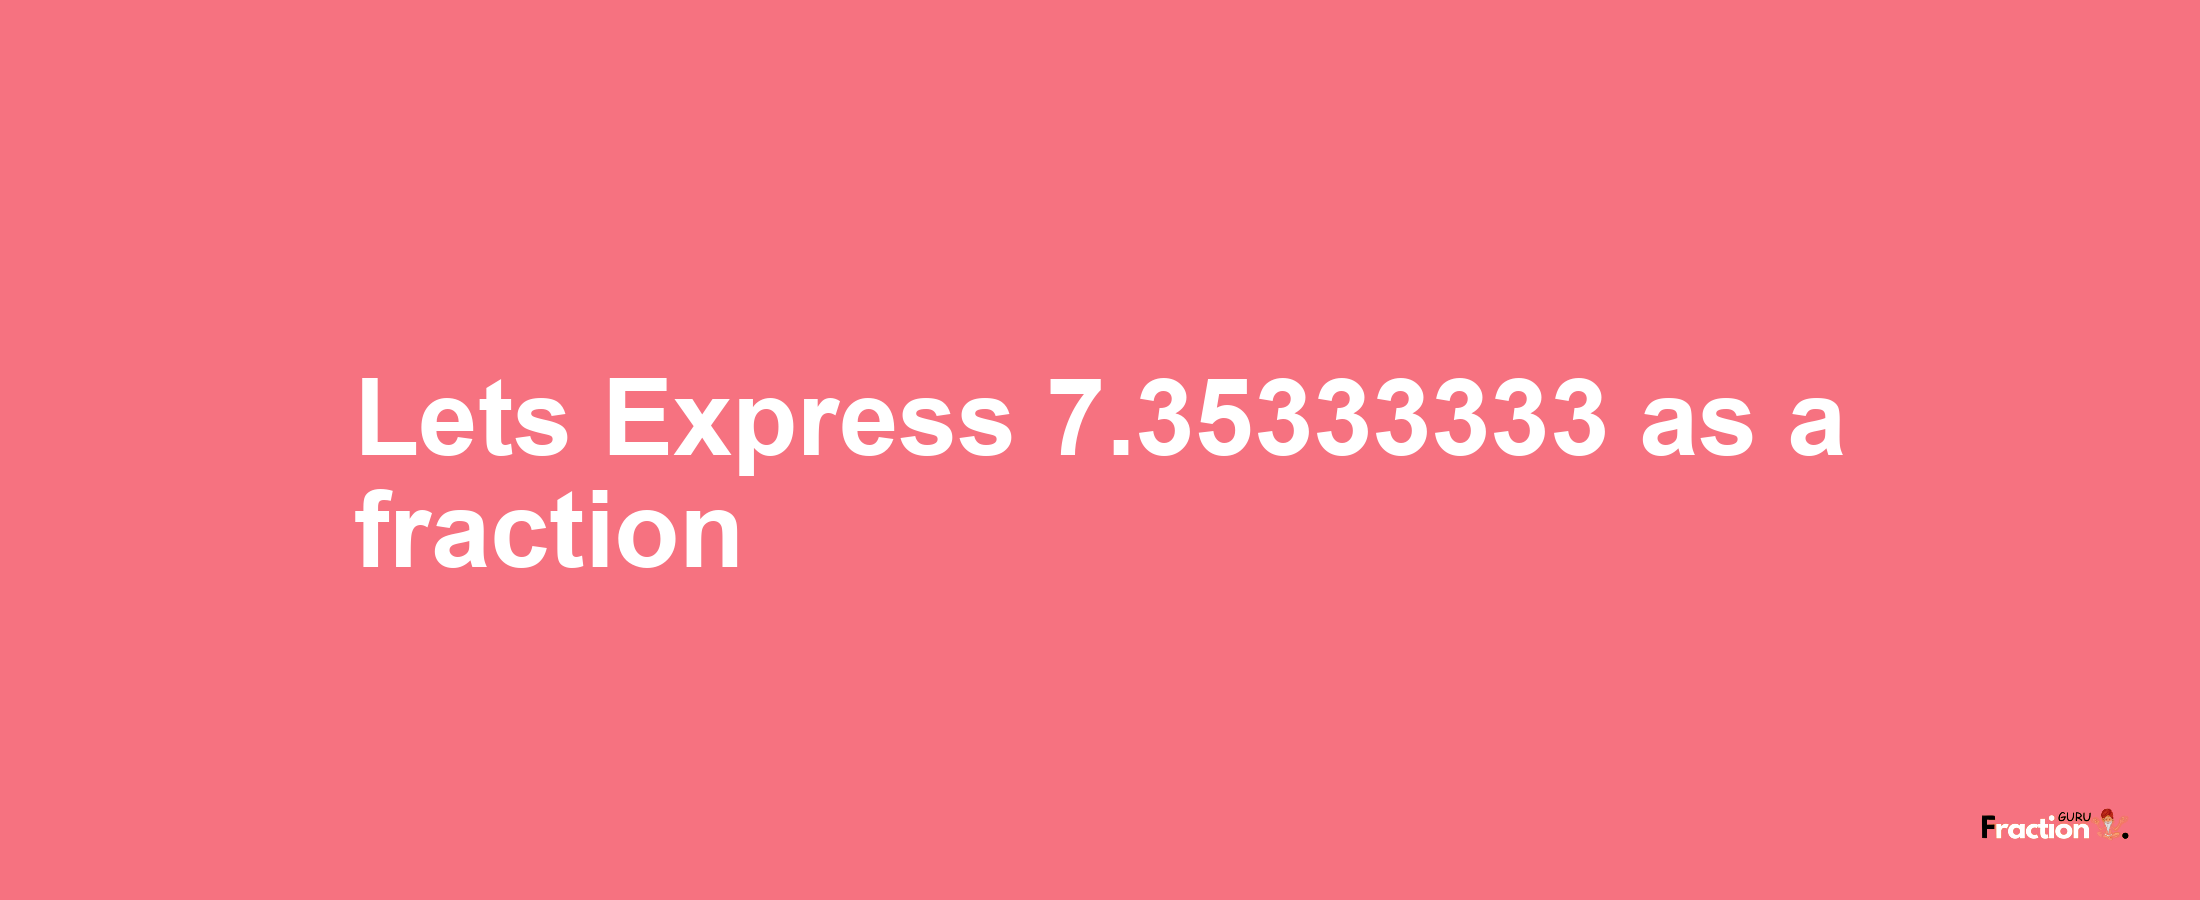 Lets Express 7.35333333 as afraction